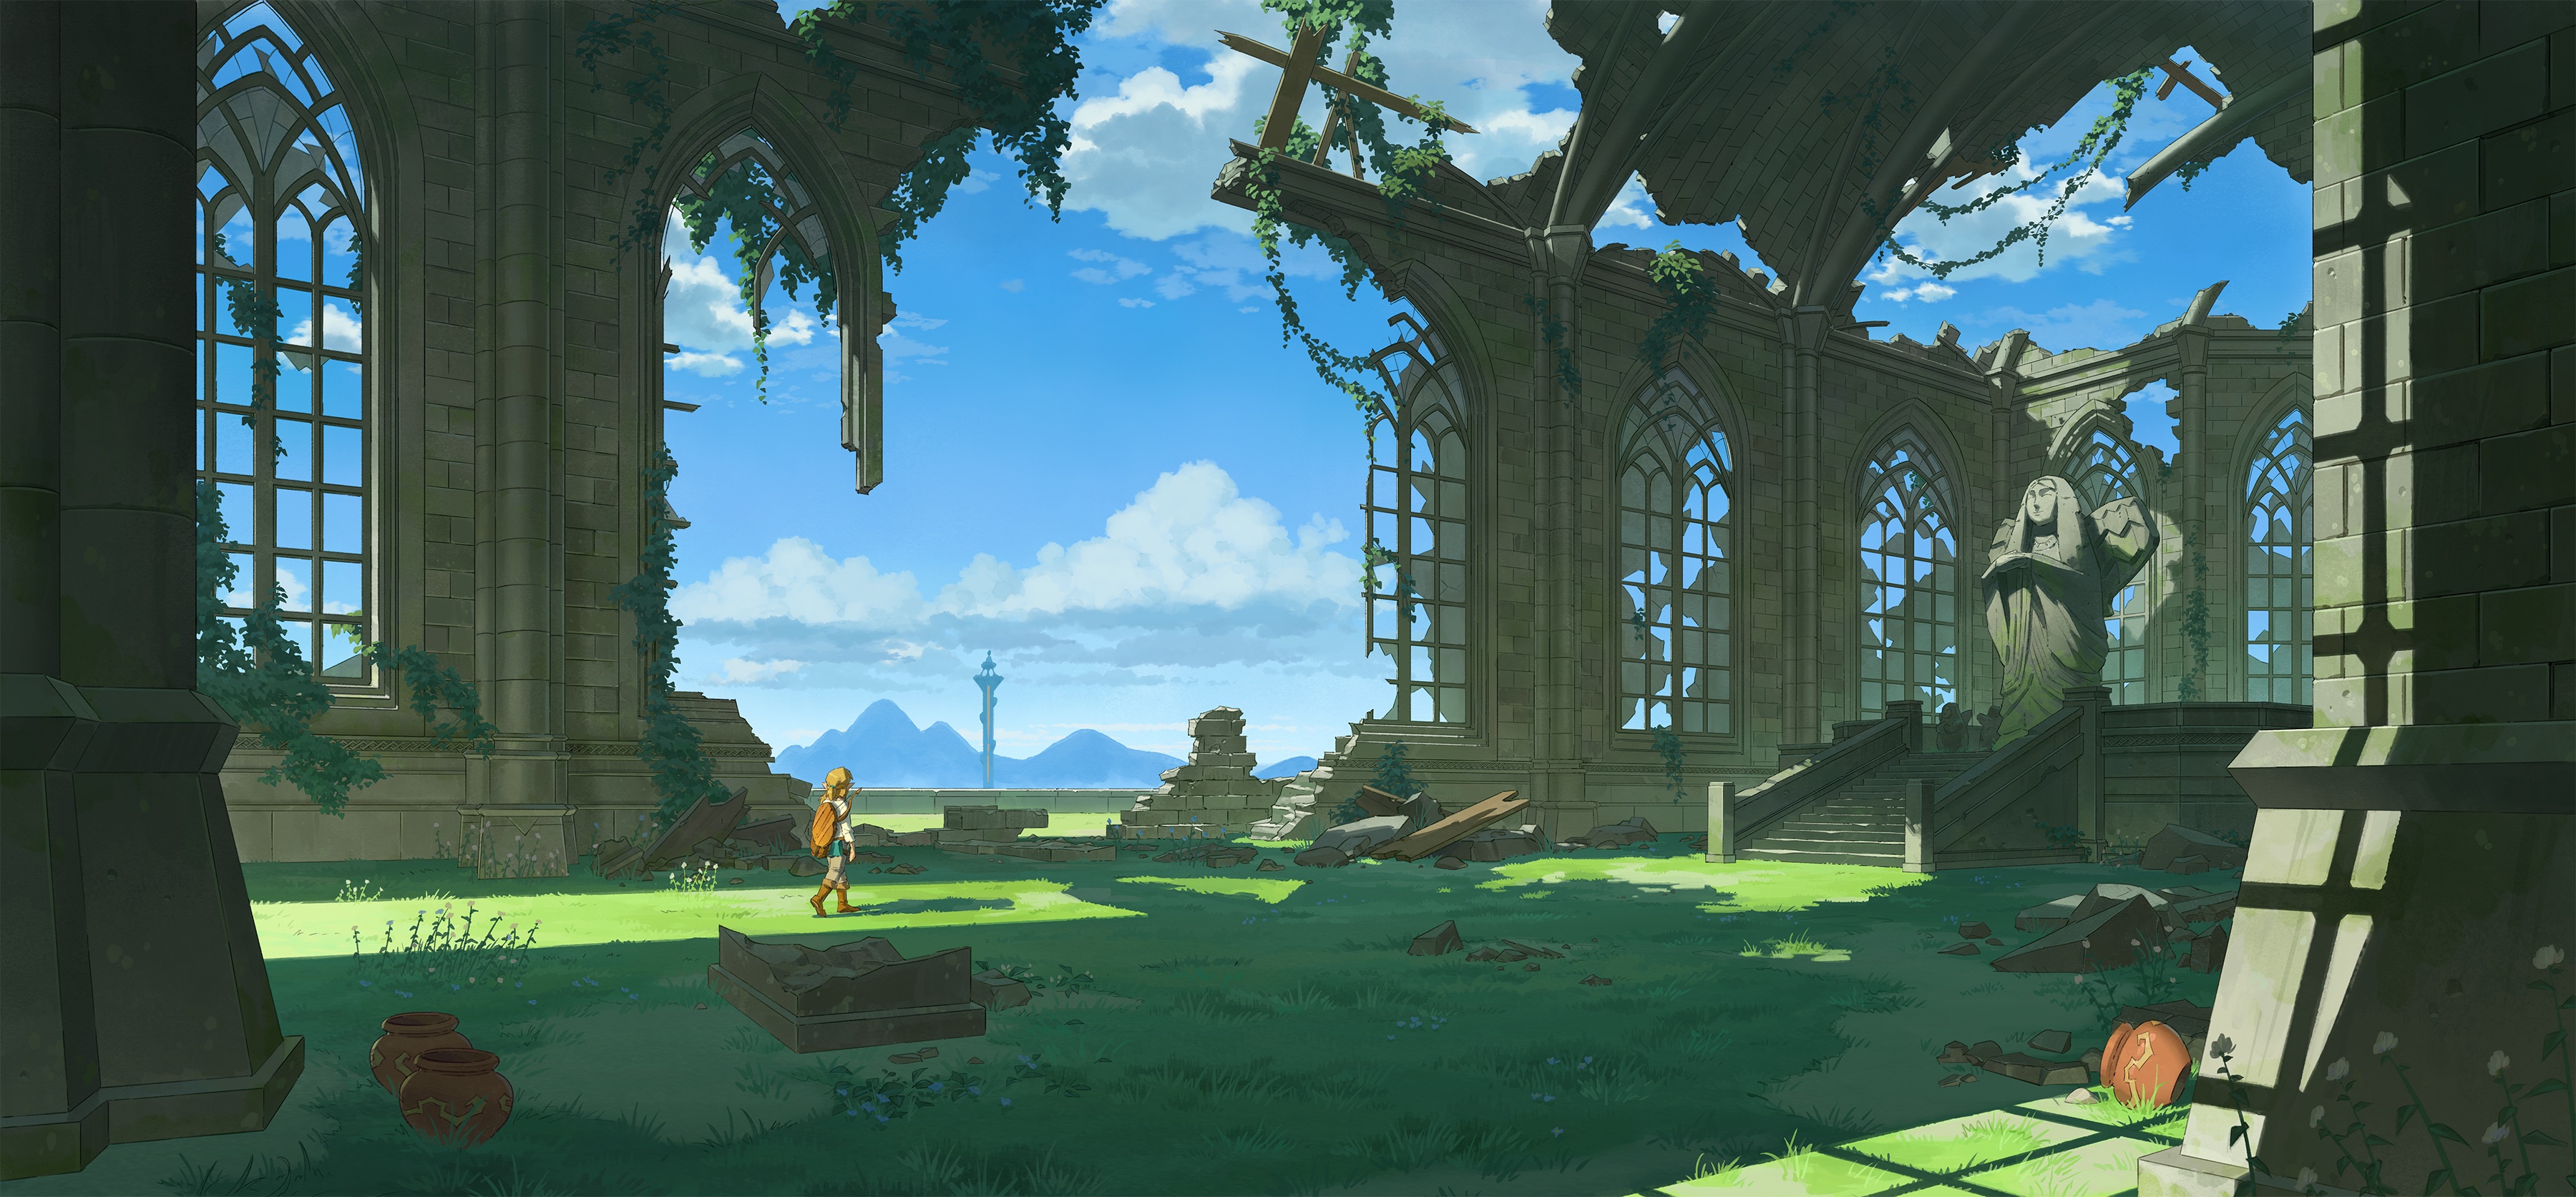 General 3600x1673 drawing artwork The Legend of Zelda The Legend of Zelda: Breath of the Wild Link ruins grass video game characters video game art sky video games clouds vases sunlight statue flowers walking